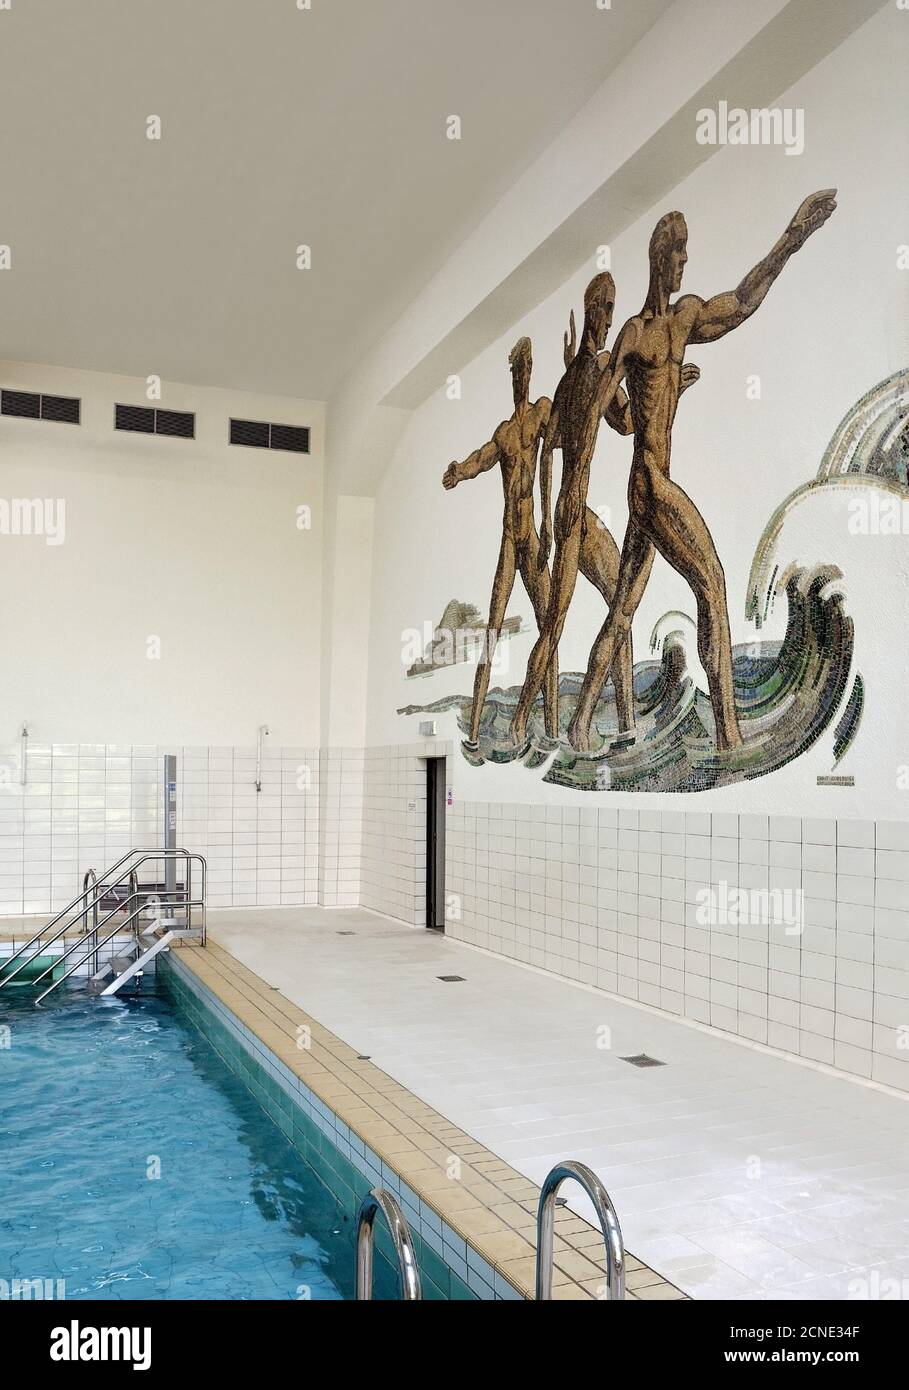 Former NS-Ordensburg Vogelsang, marble plaster mosaic of the swimming pool, Schleiden, Germany Stock Photo